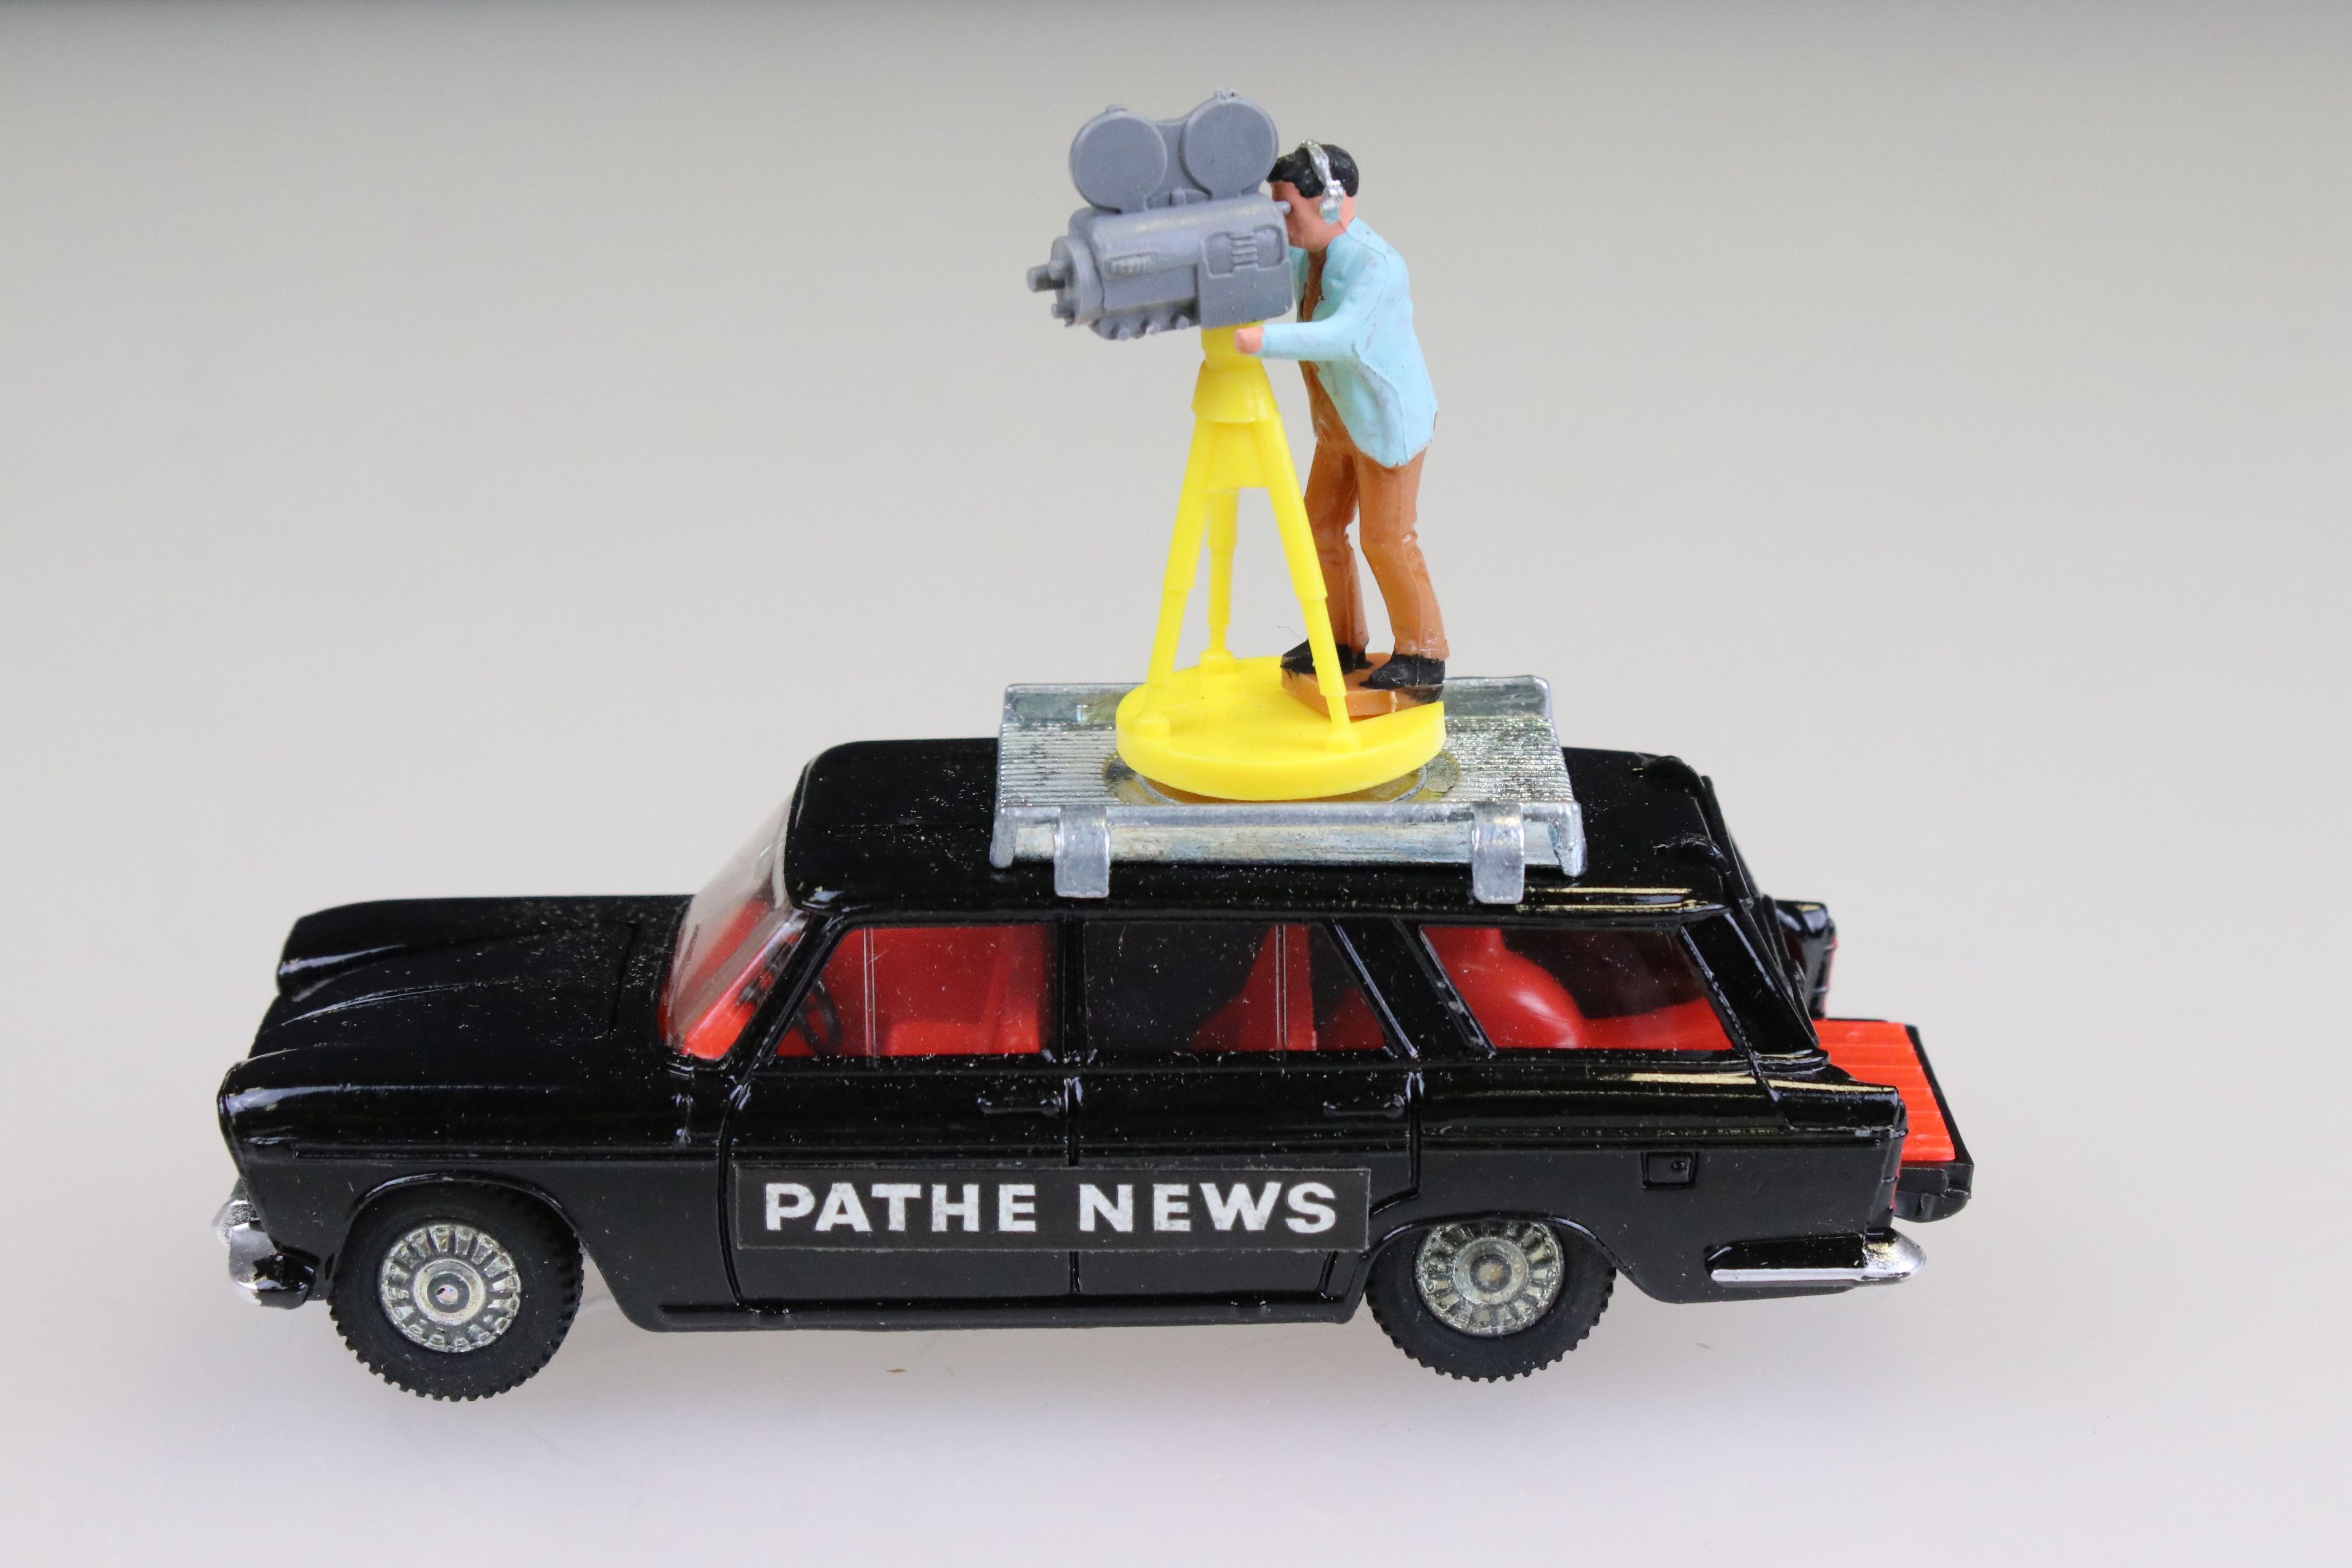 Boxed Dinky 281 Pathe News Camera Car diecast model complete with cameraman figure, diecast & decals - Image 2 of 12